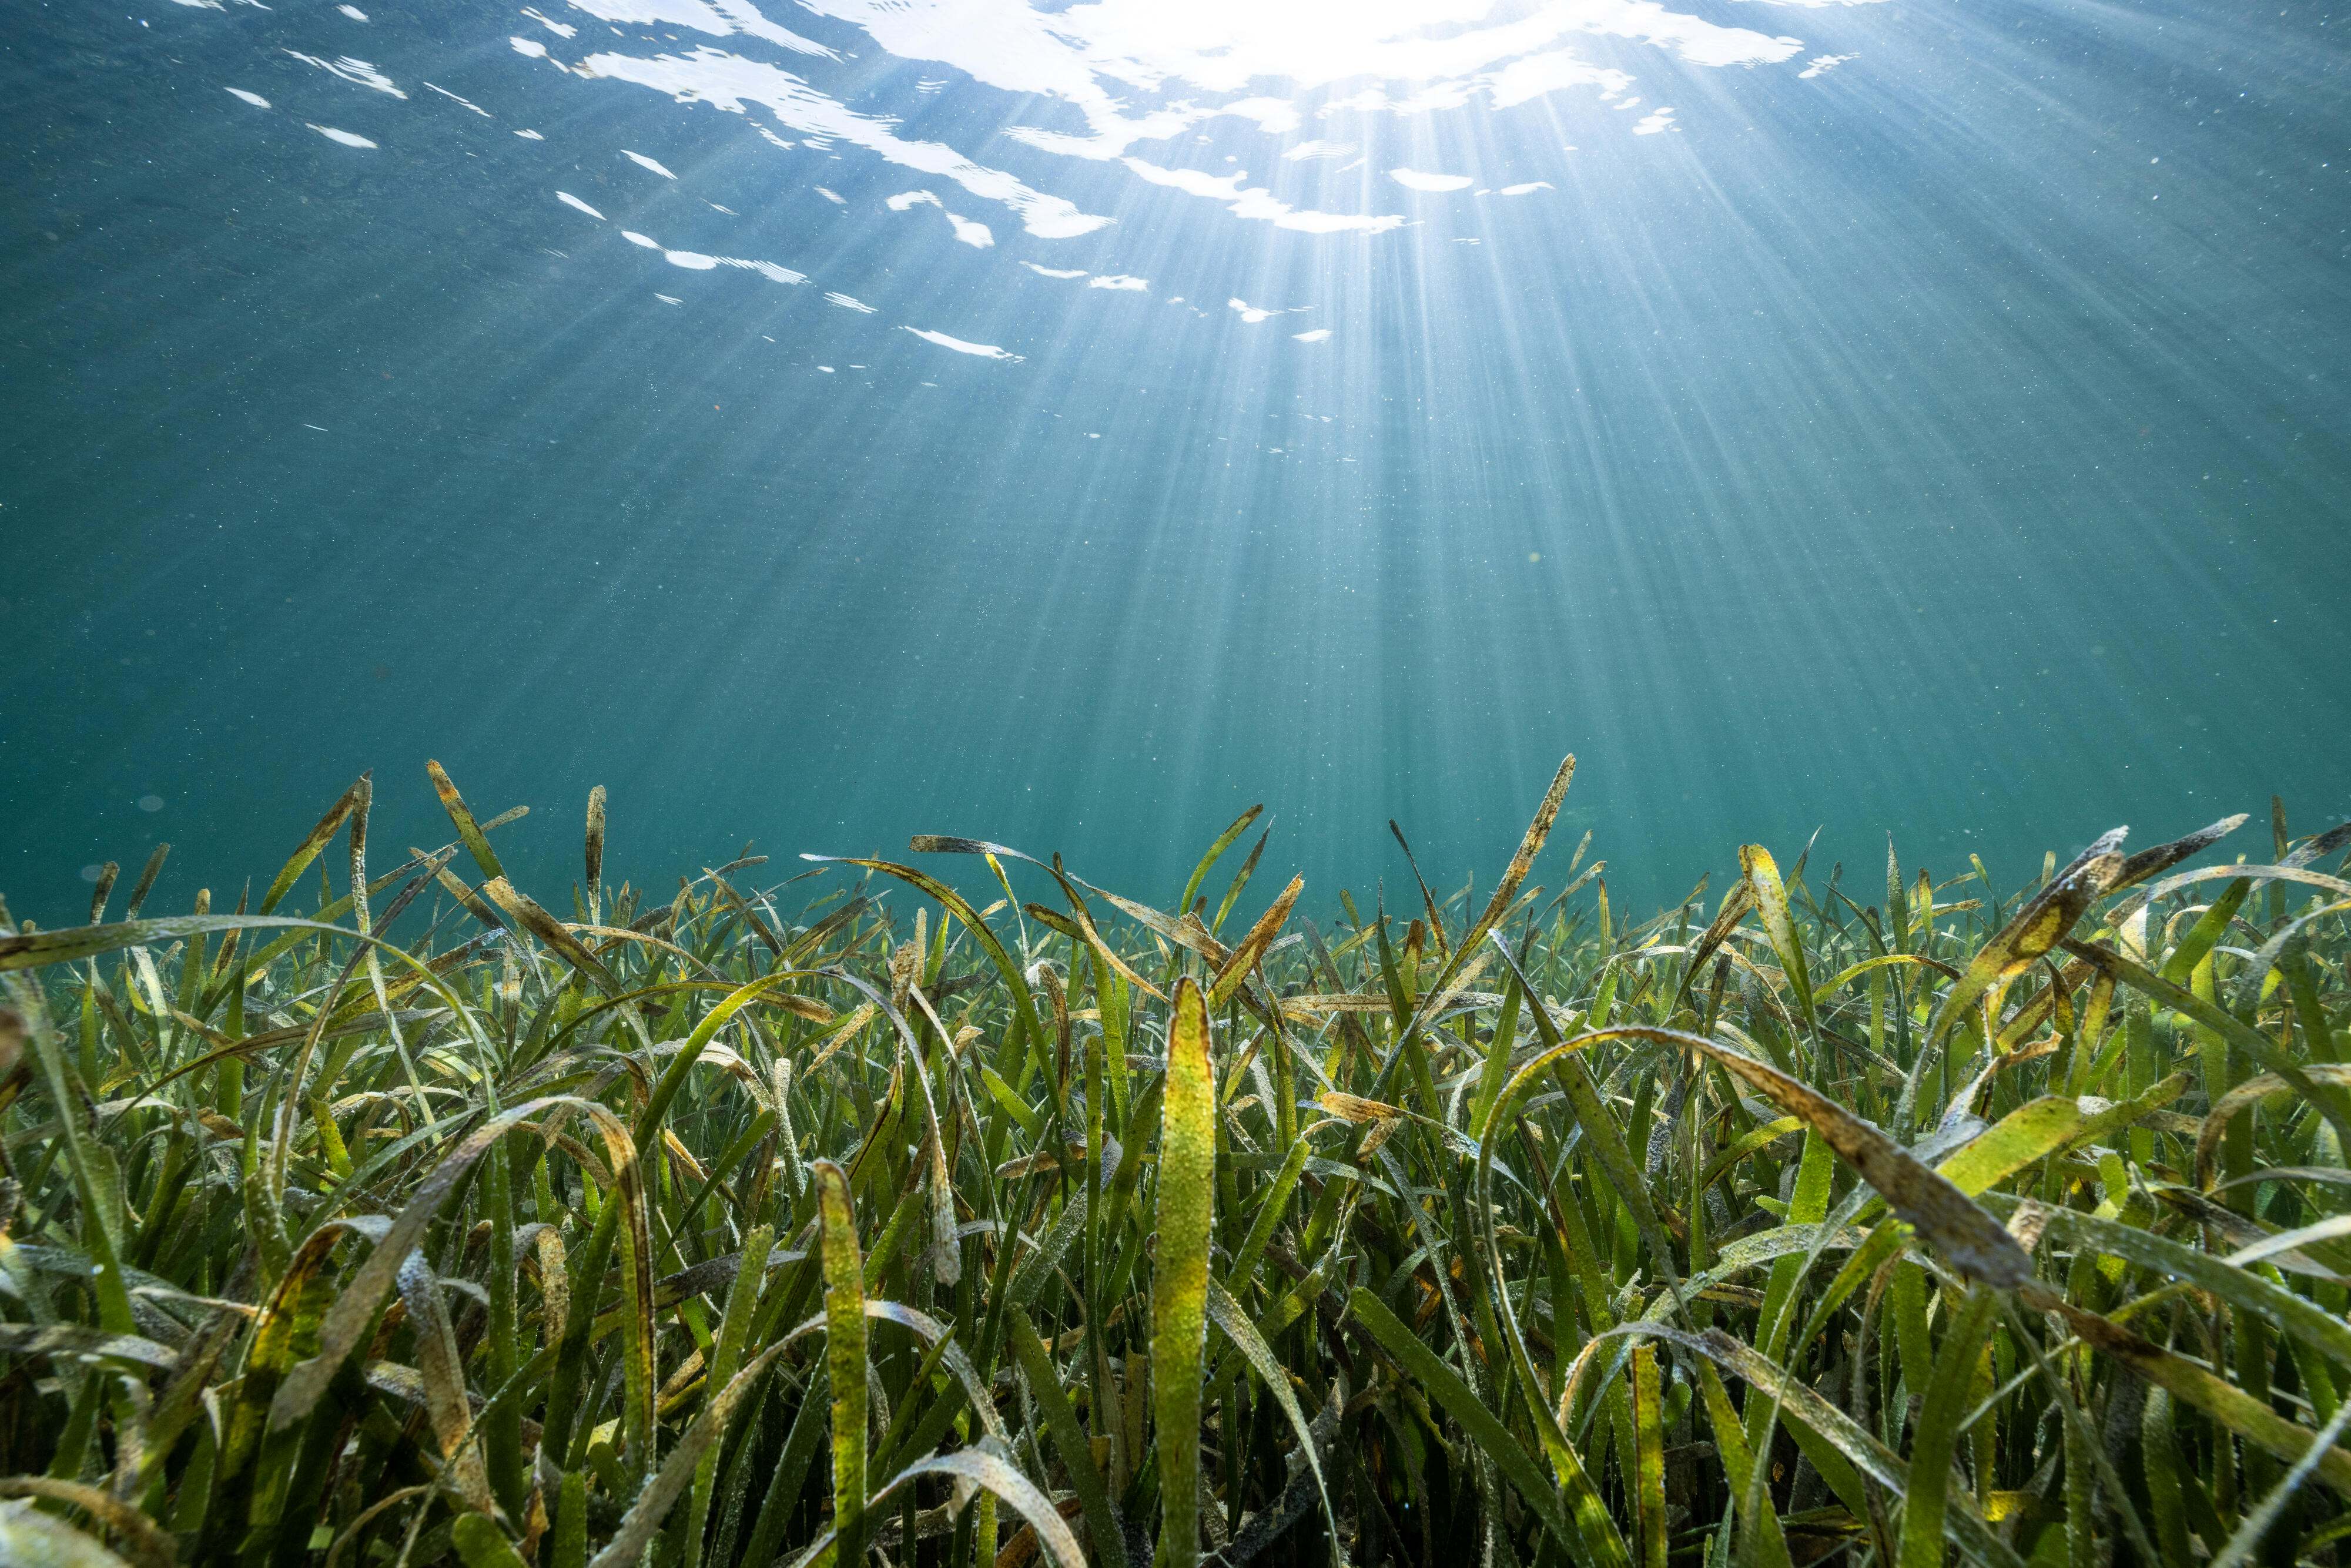 Underwater view of a meadow of sea grass off the coast of Belize.